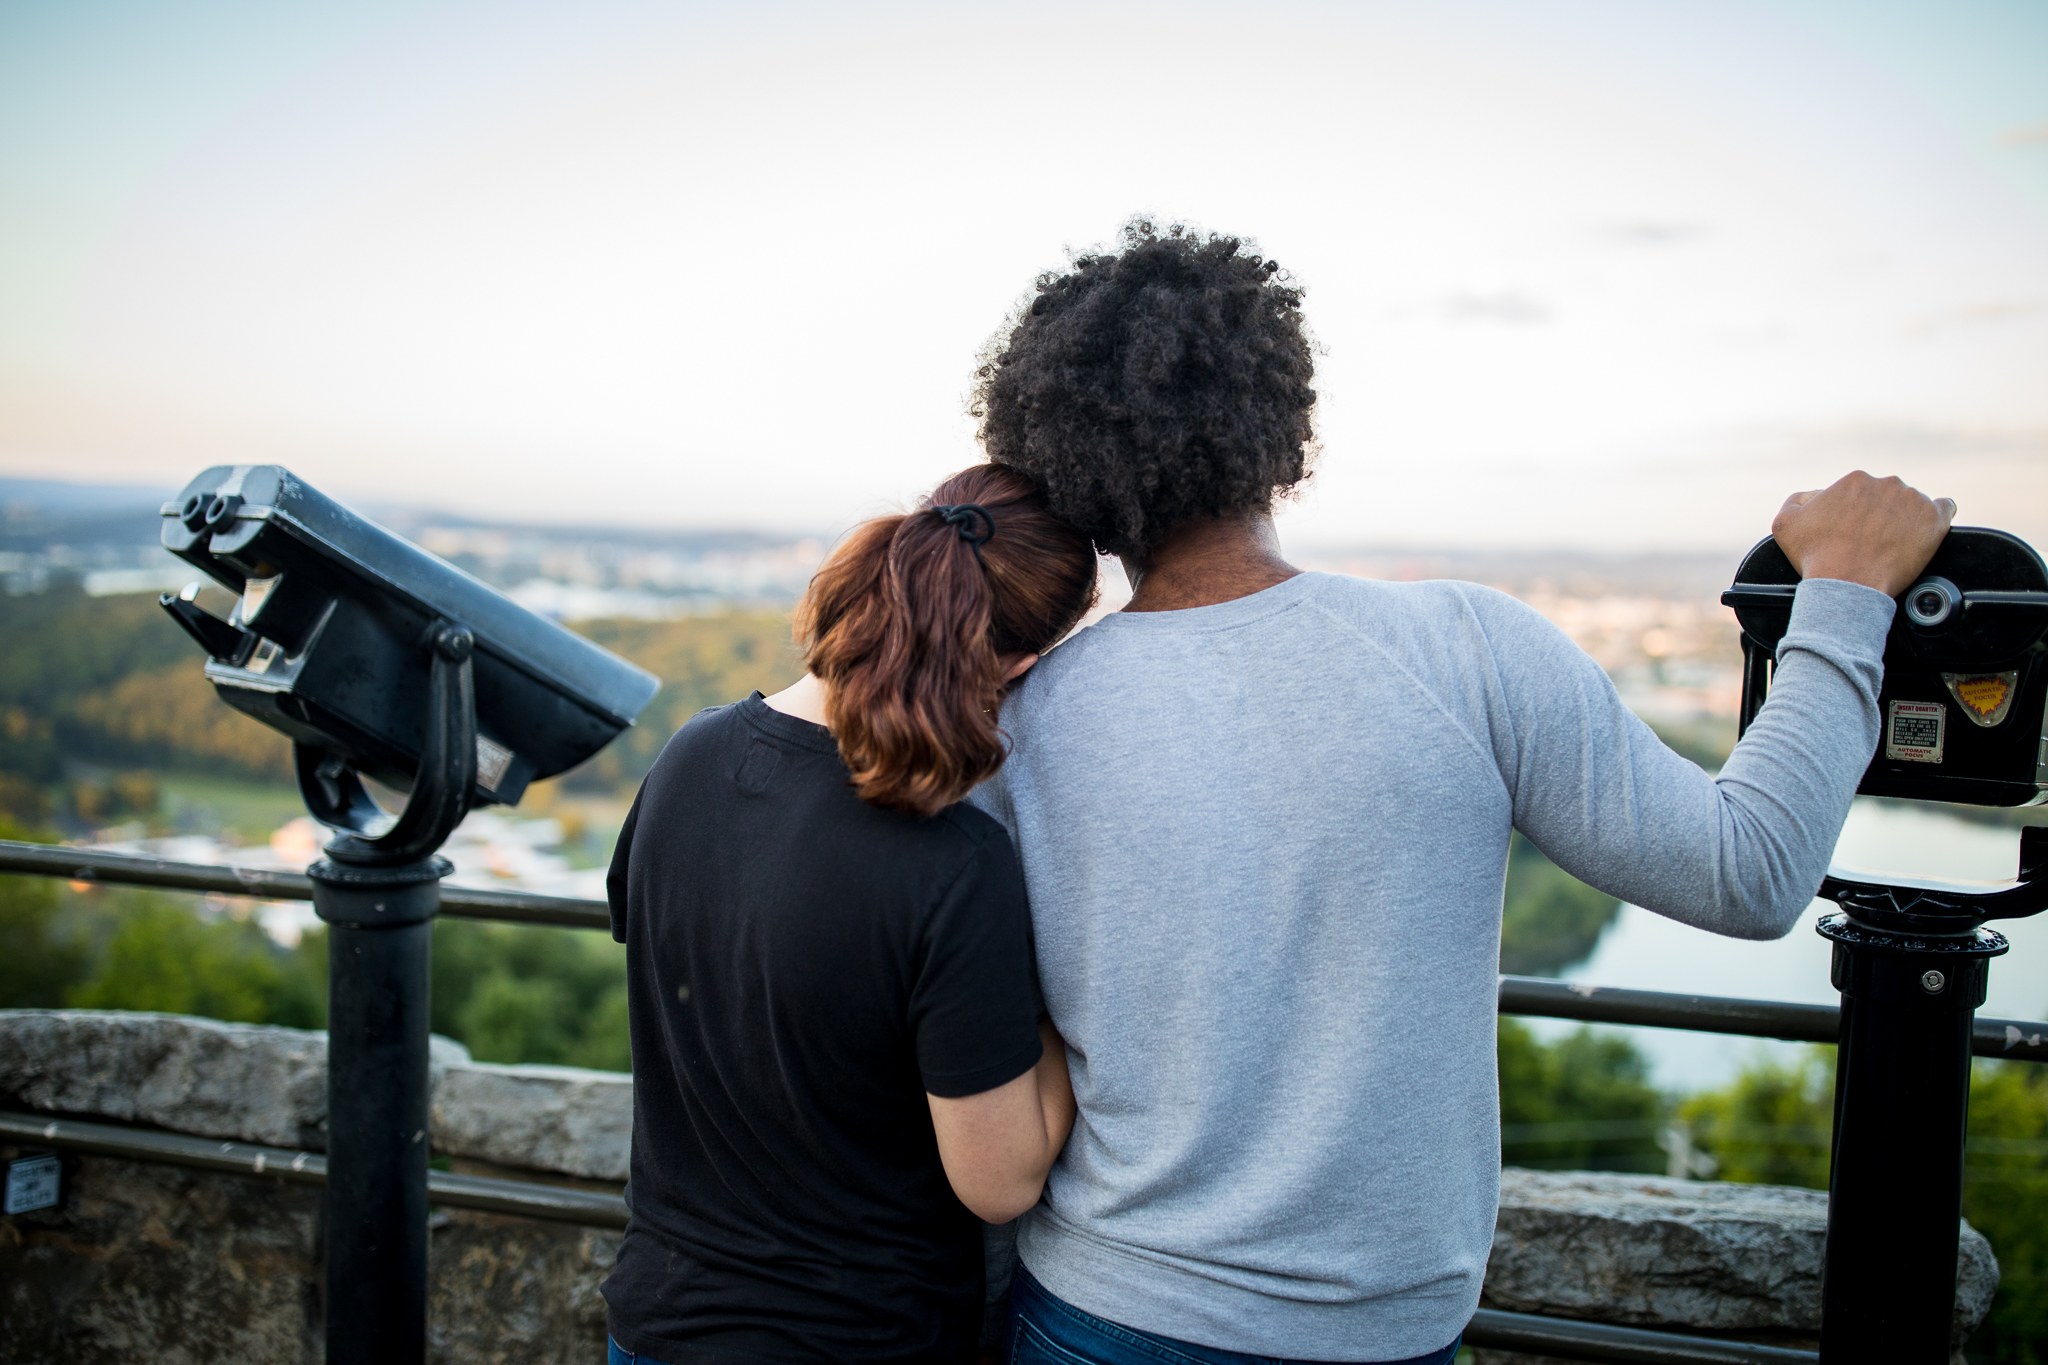 A male and female multi-racial couple stand on the top of the tower lookout with their bakcs to the camera, enjoying the view. The woman rests her head on the man's shoulder.